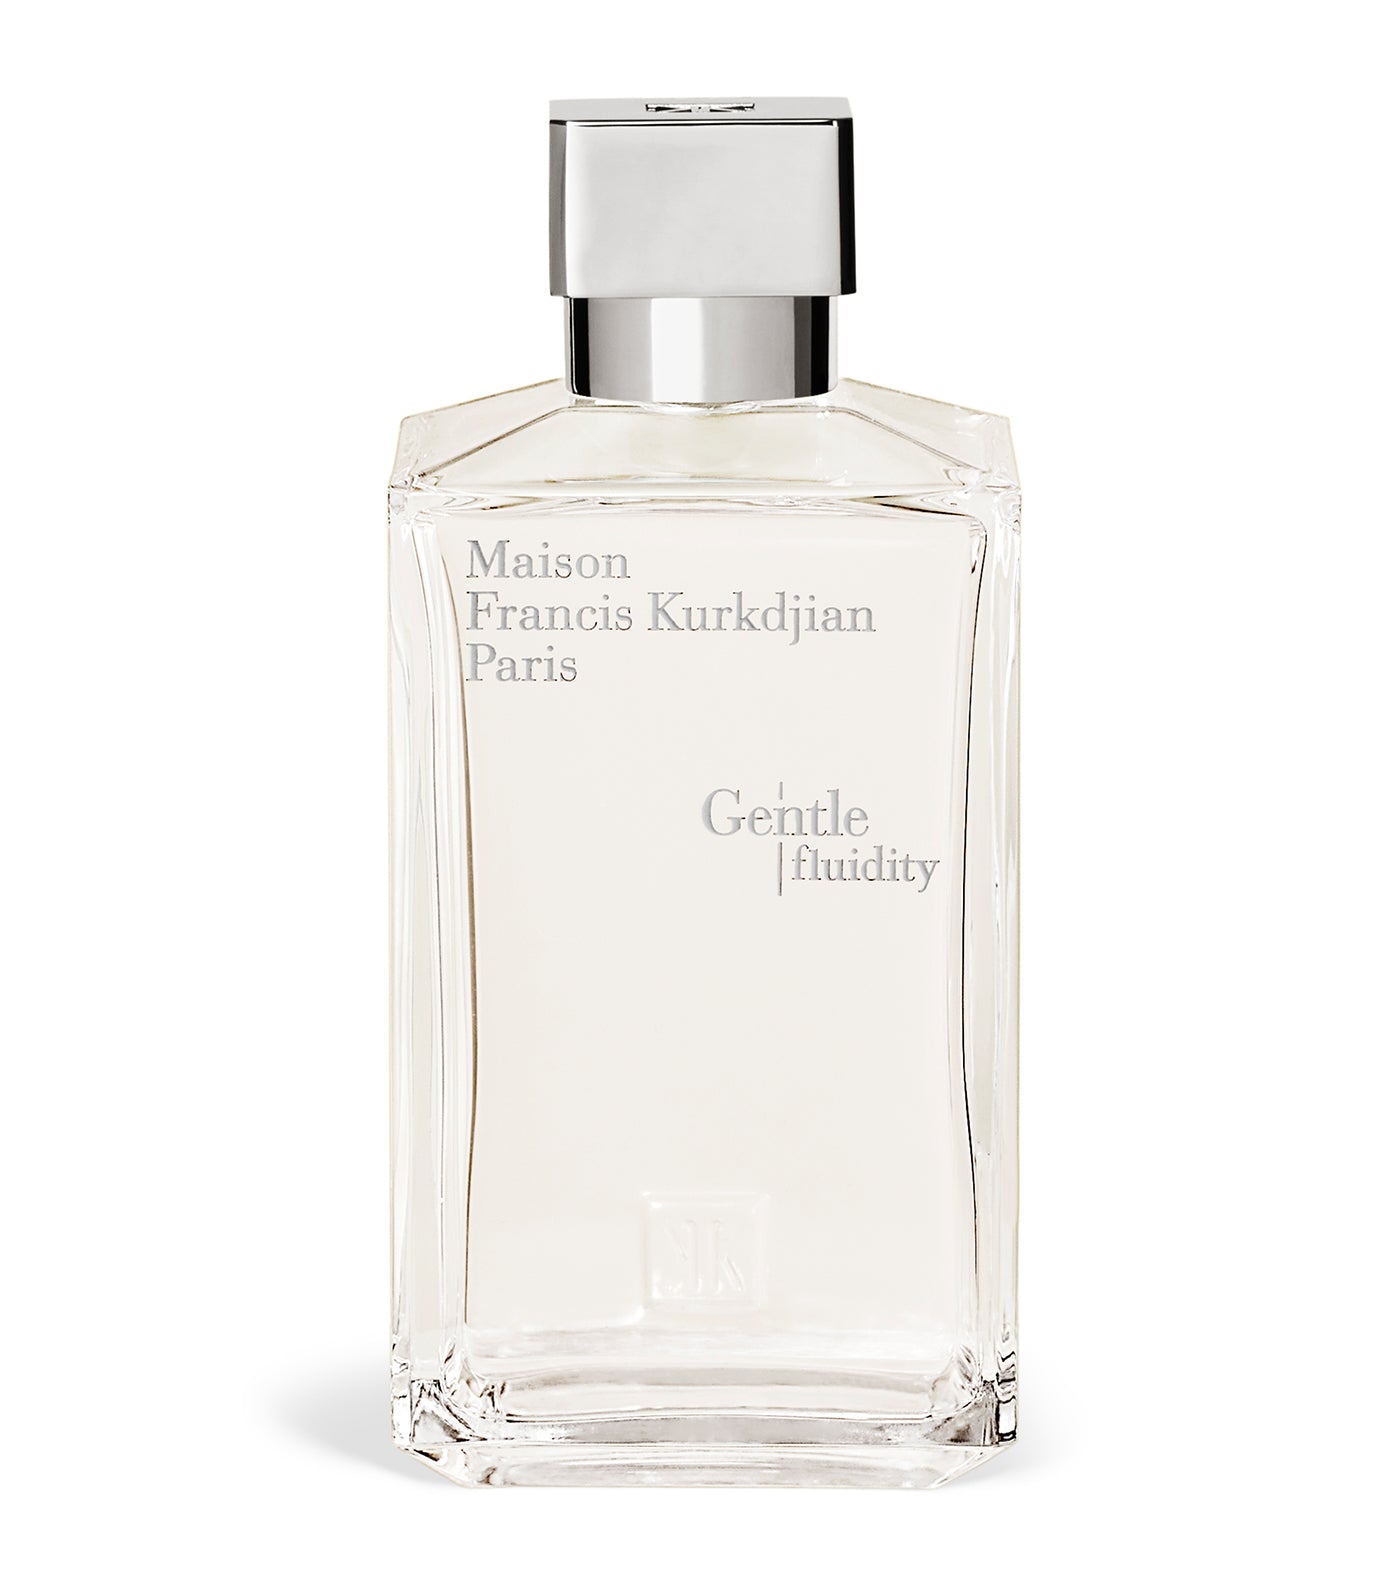 Private Launch Of Maison Francis Kurkdjian's Gentle Fluidity With